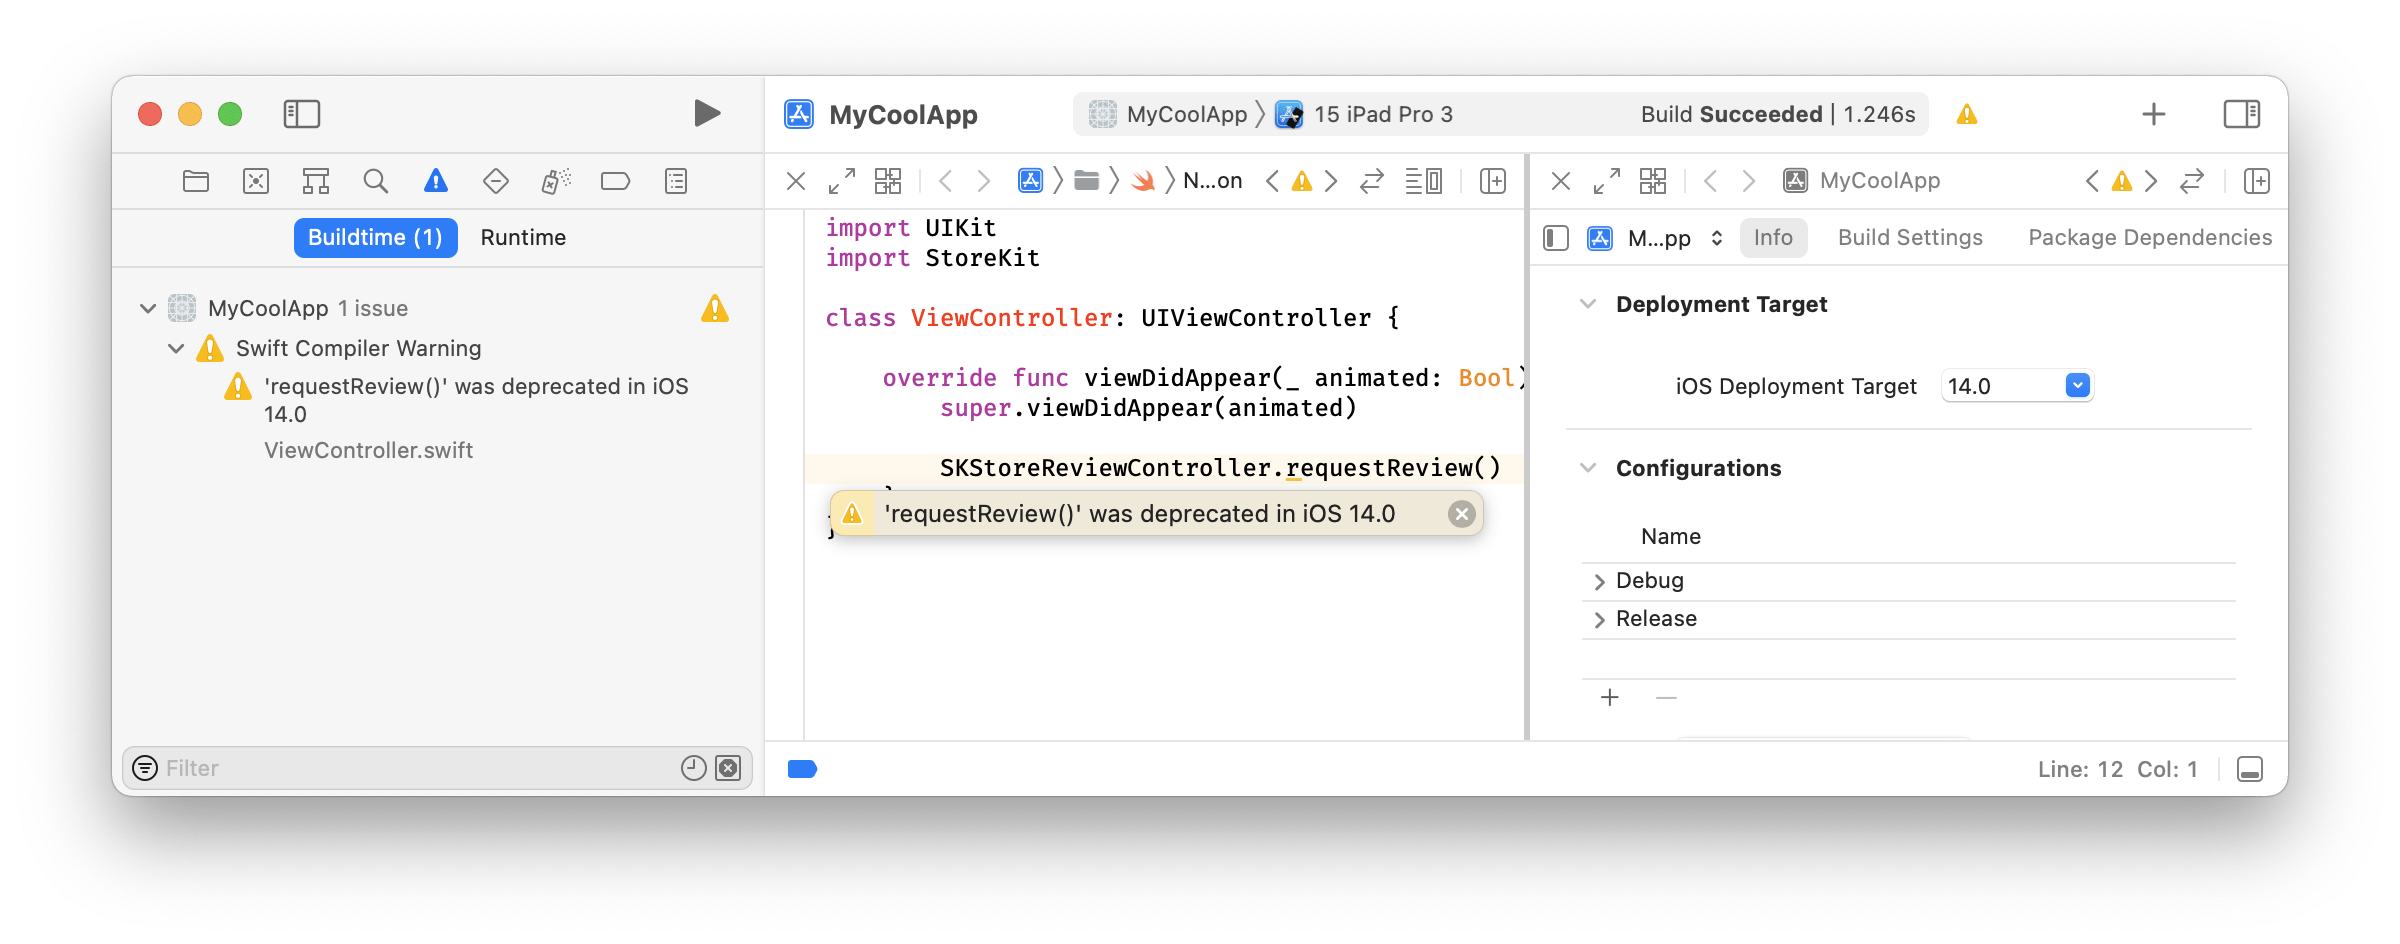 Screenshot of Xcode project with the deployment target set to iOS 14.0 and using SKStoreReviewController.requestReview(). The issues navigator shows Swift Compiler Warning: requestReview() was deprecated in iOS 14.0.